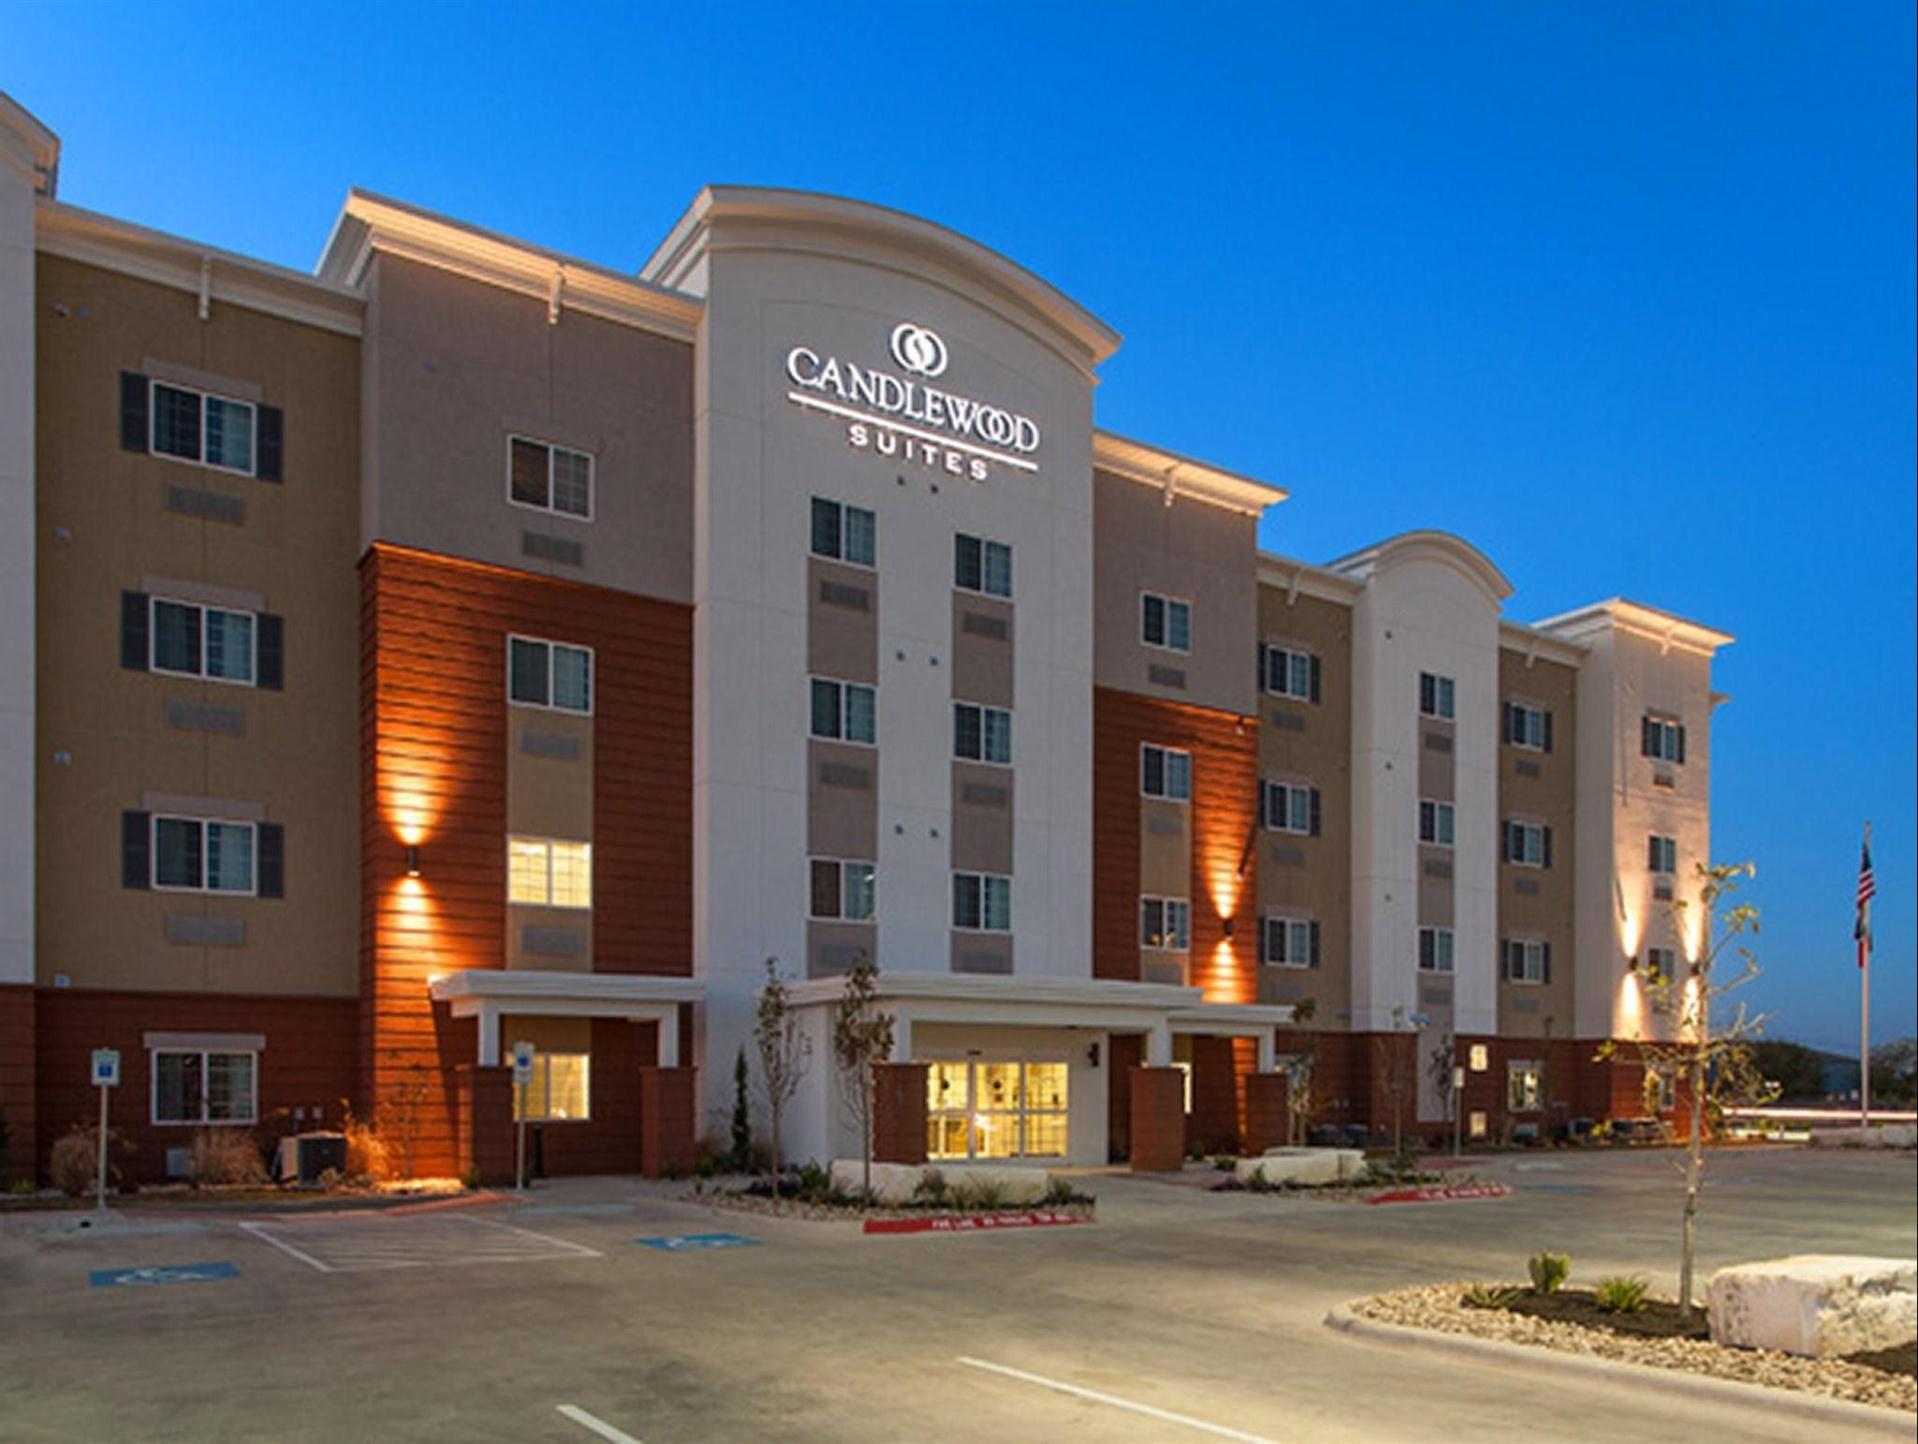 Candlewood Suites San Marcos in San Marcos, TX